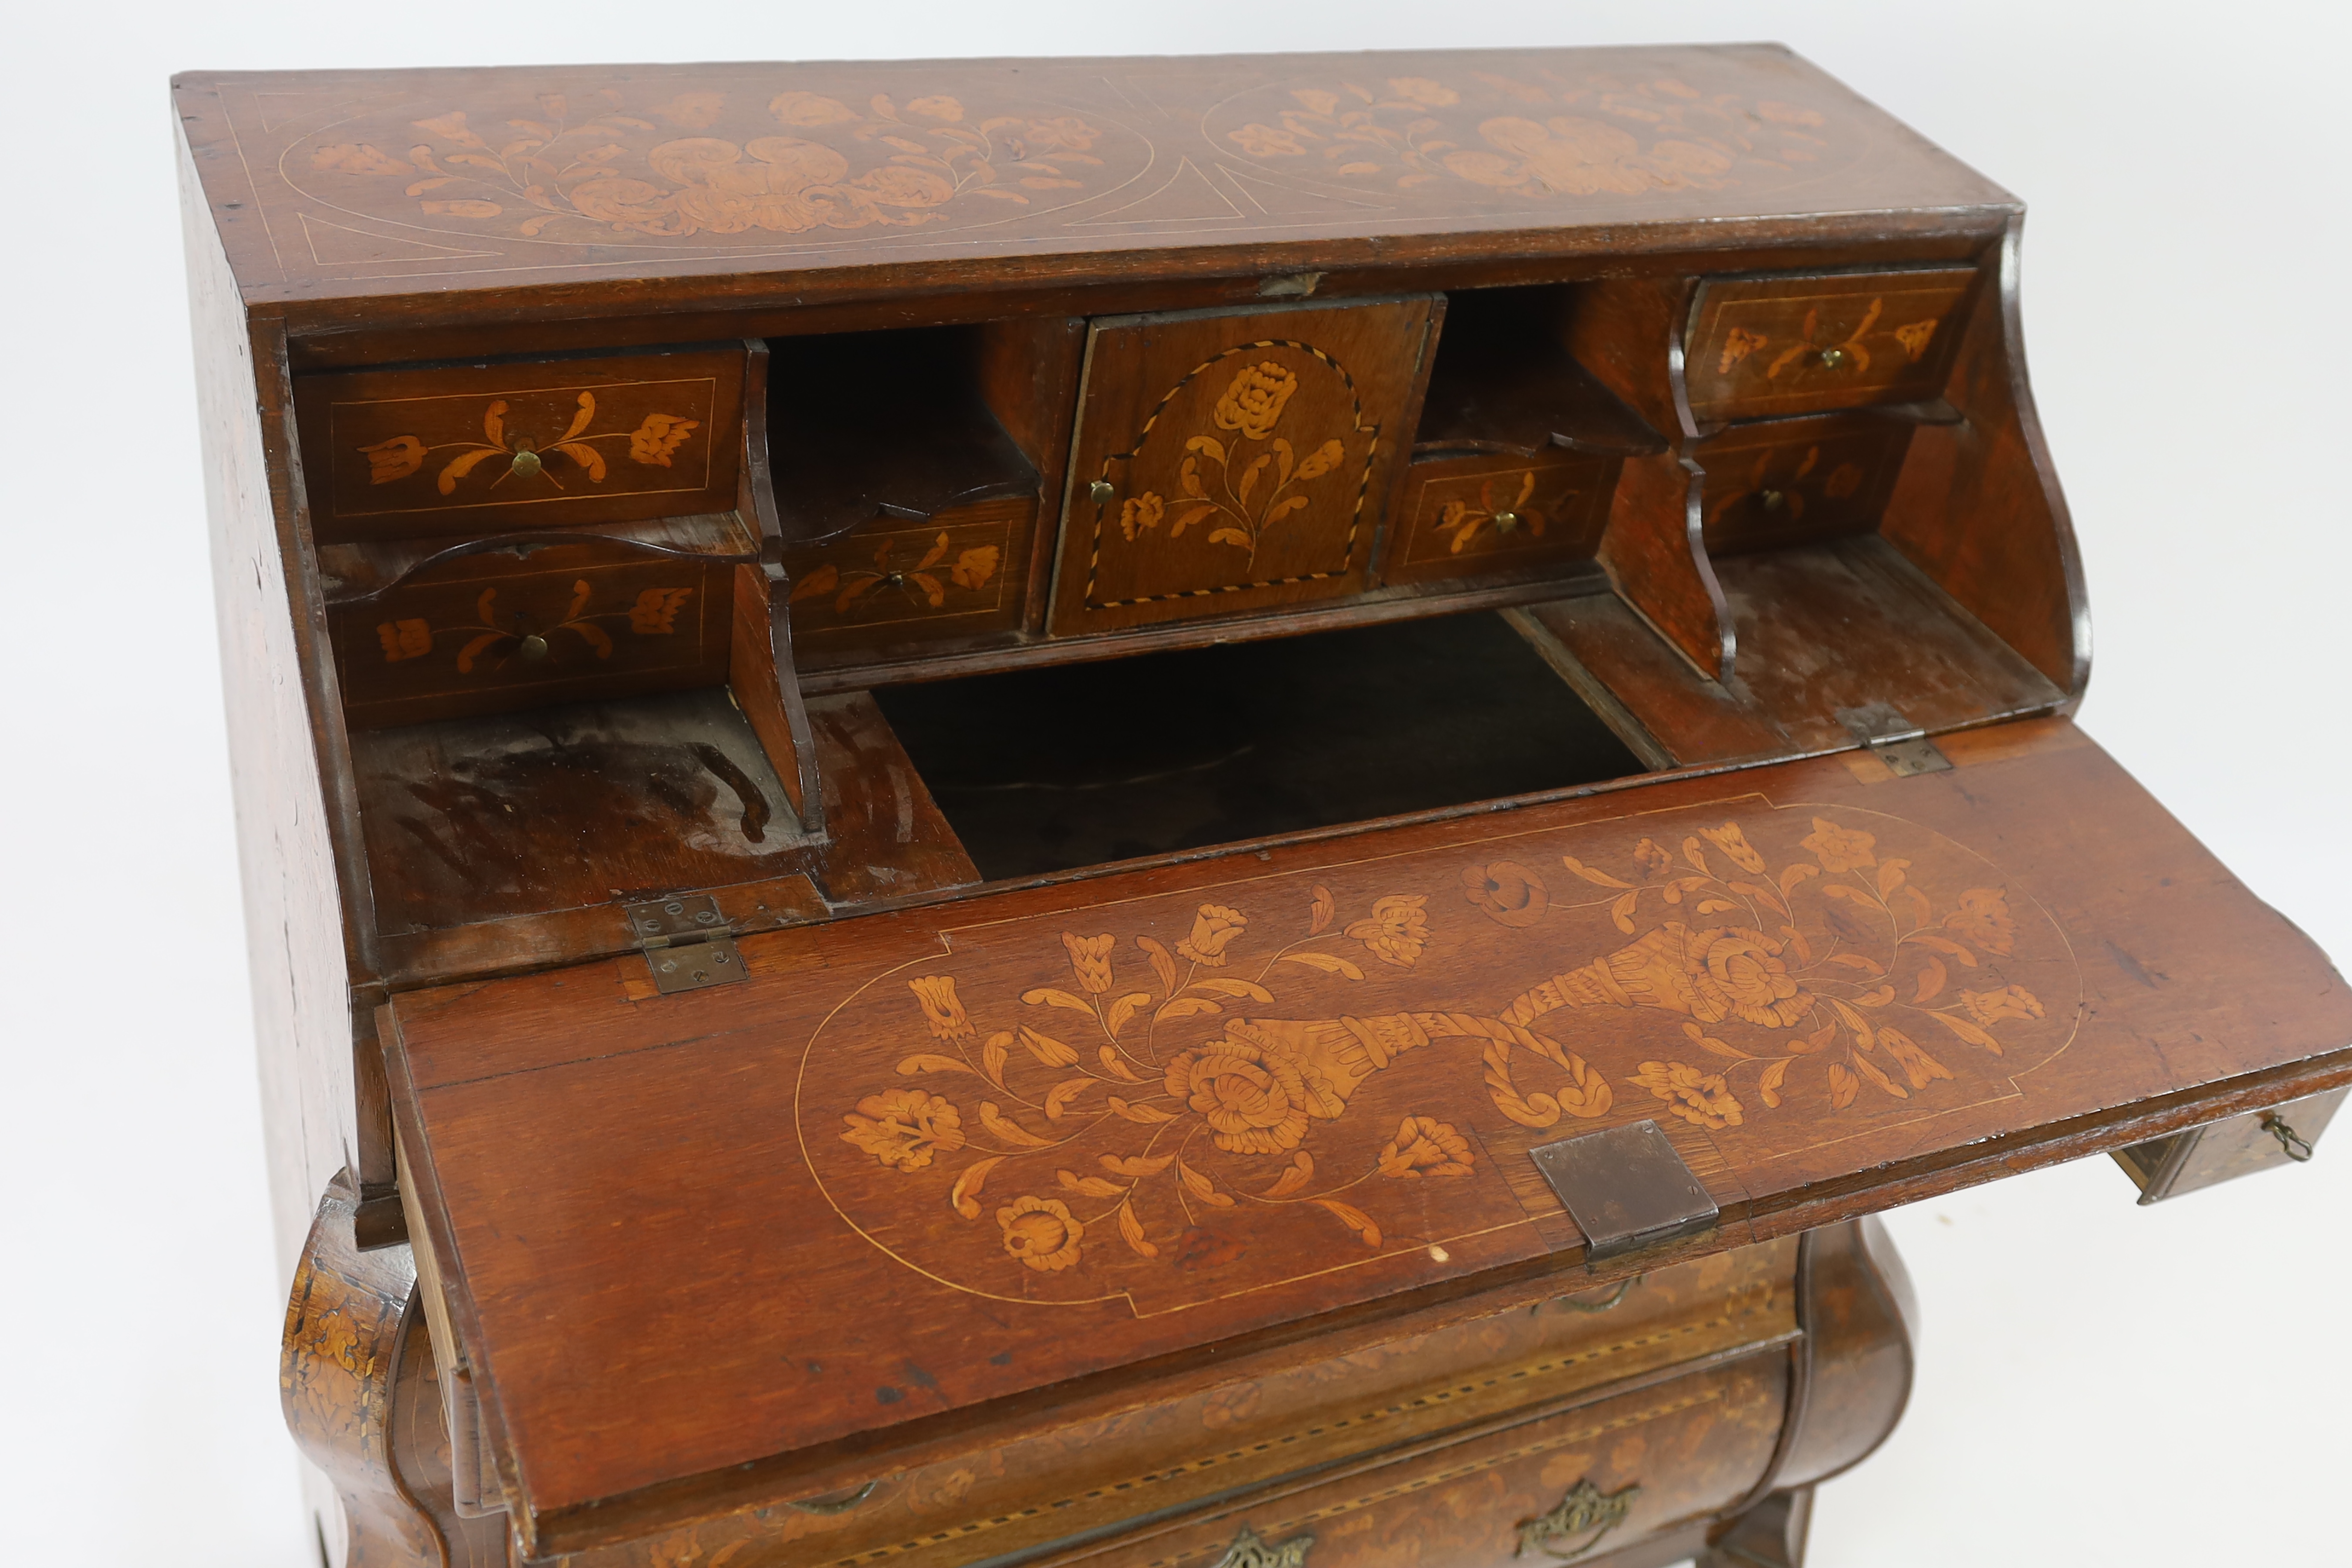 A late 18th century Dutch oak and floral marquetry double bombe bureau